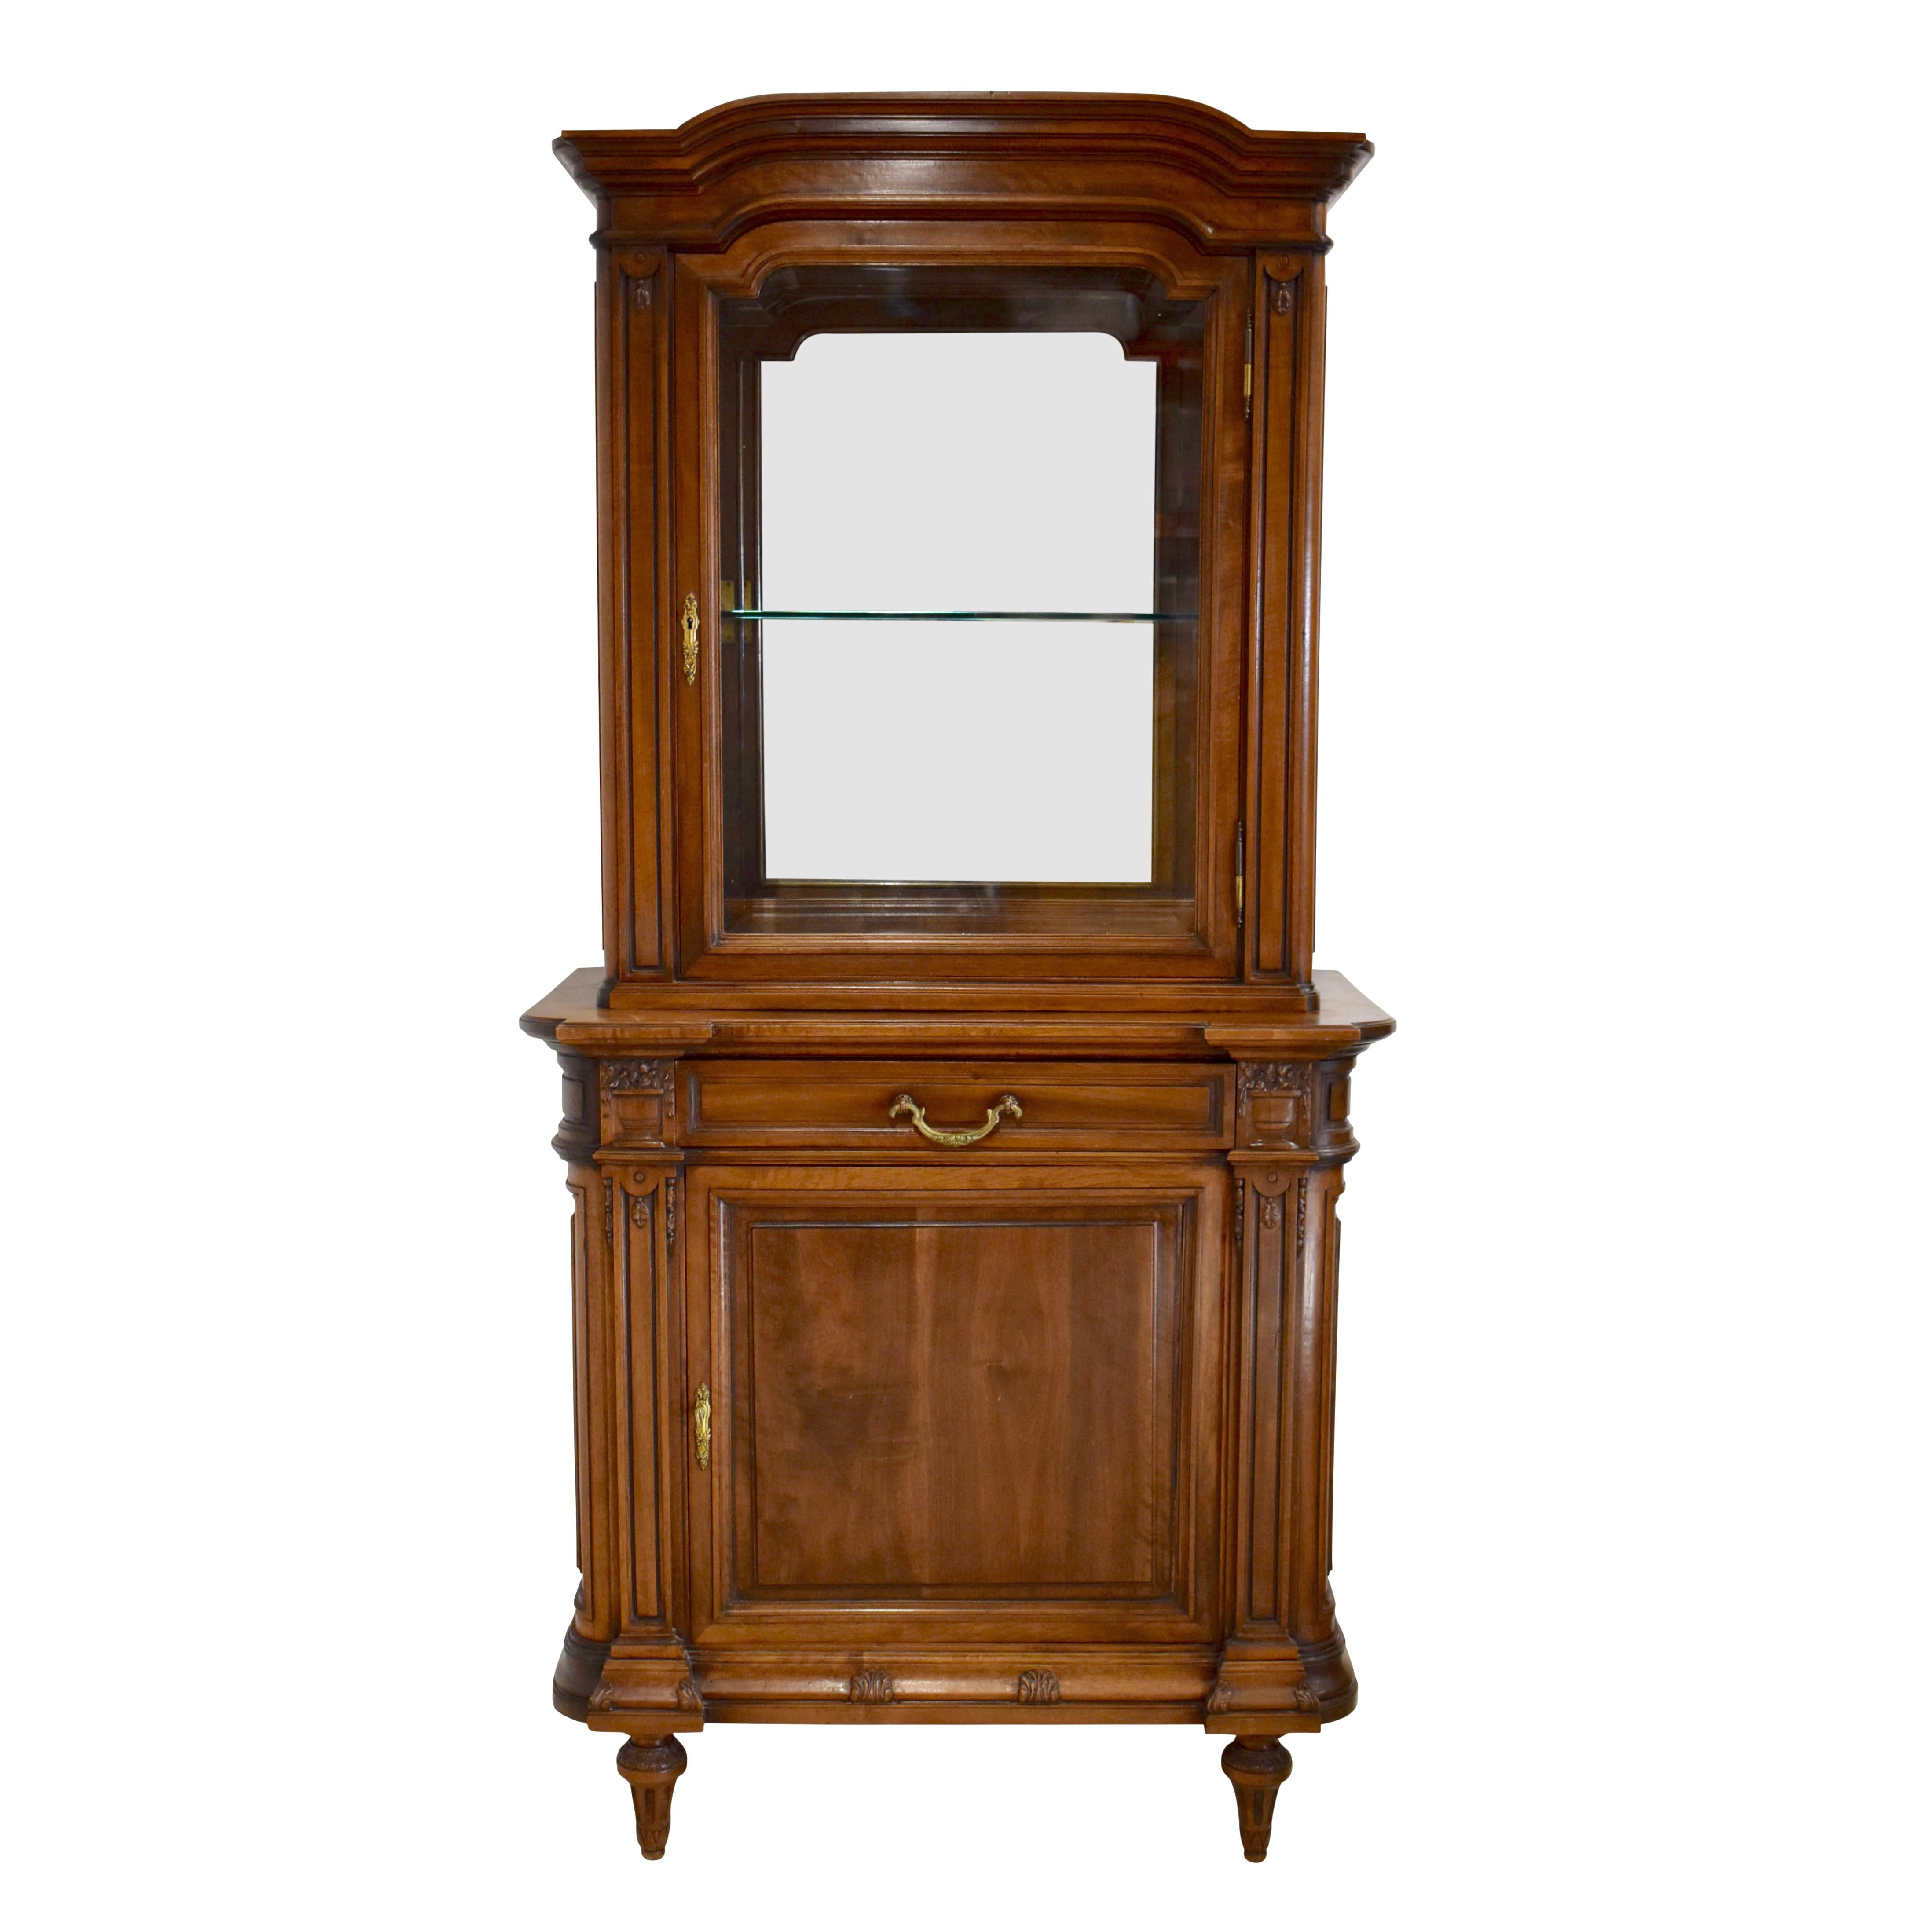 Generous storage and a delightful display case are paired in this remarkable vitrine. Crafted from beautiful walnut at the beginning of the twentieth century, the vitrine showcases a shaped bonnet, carvings of dainty flowers in planters at the